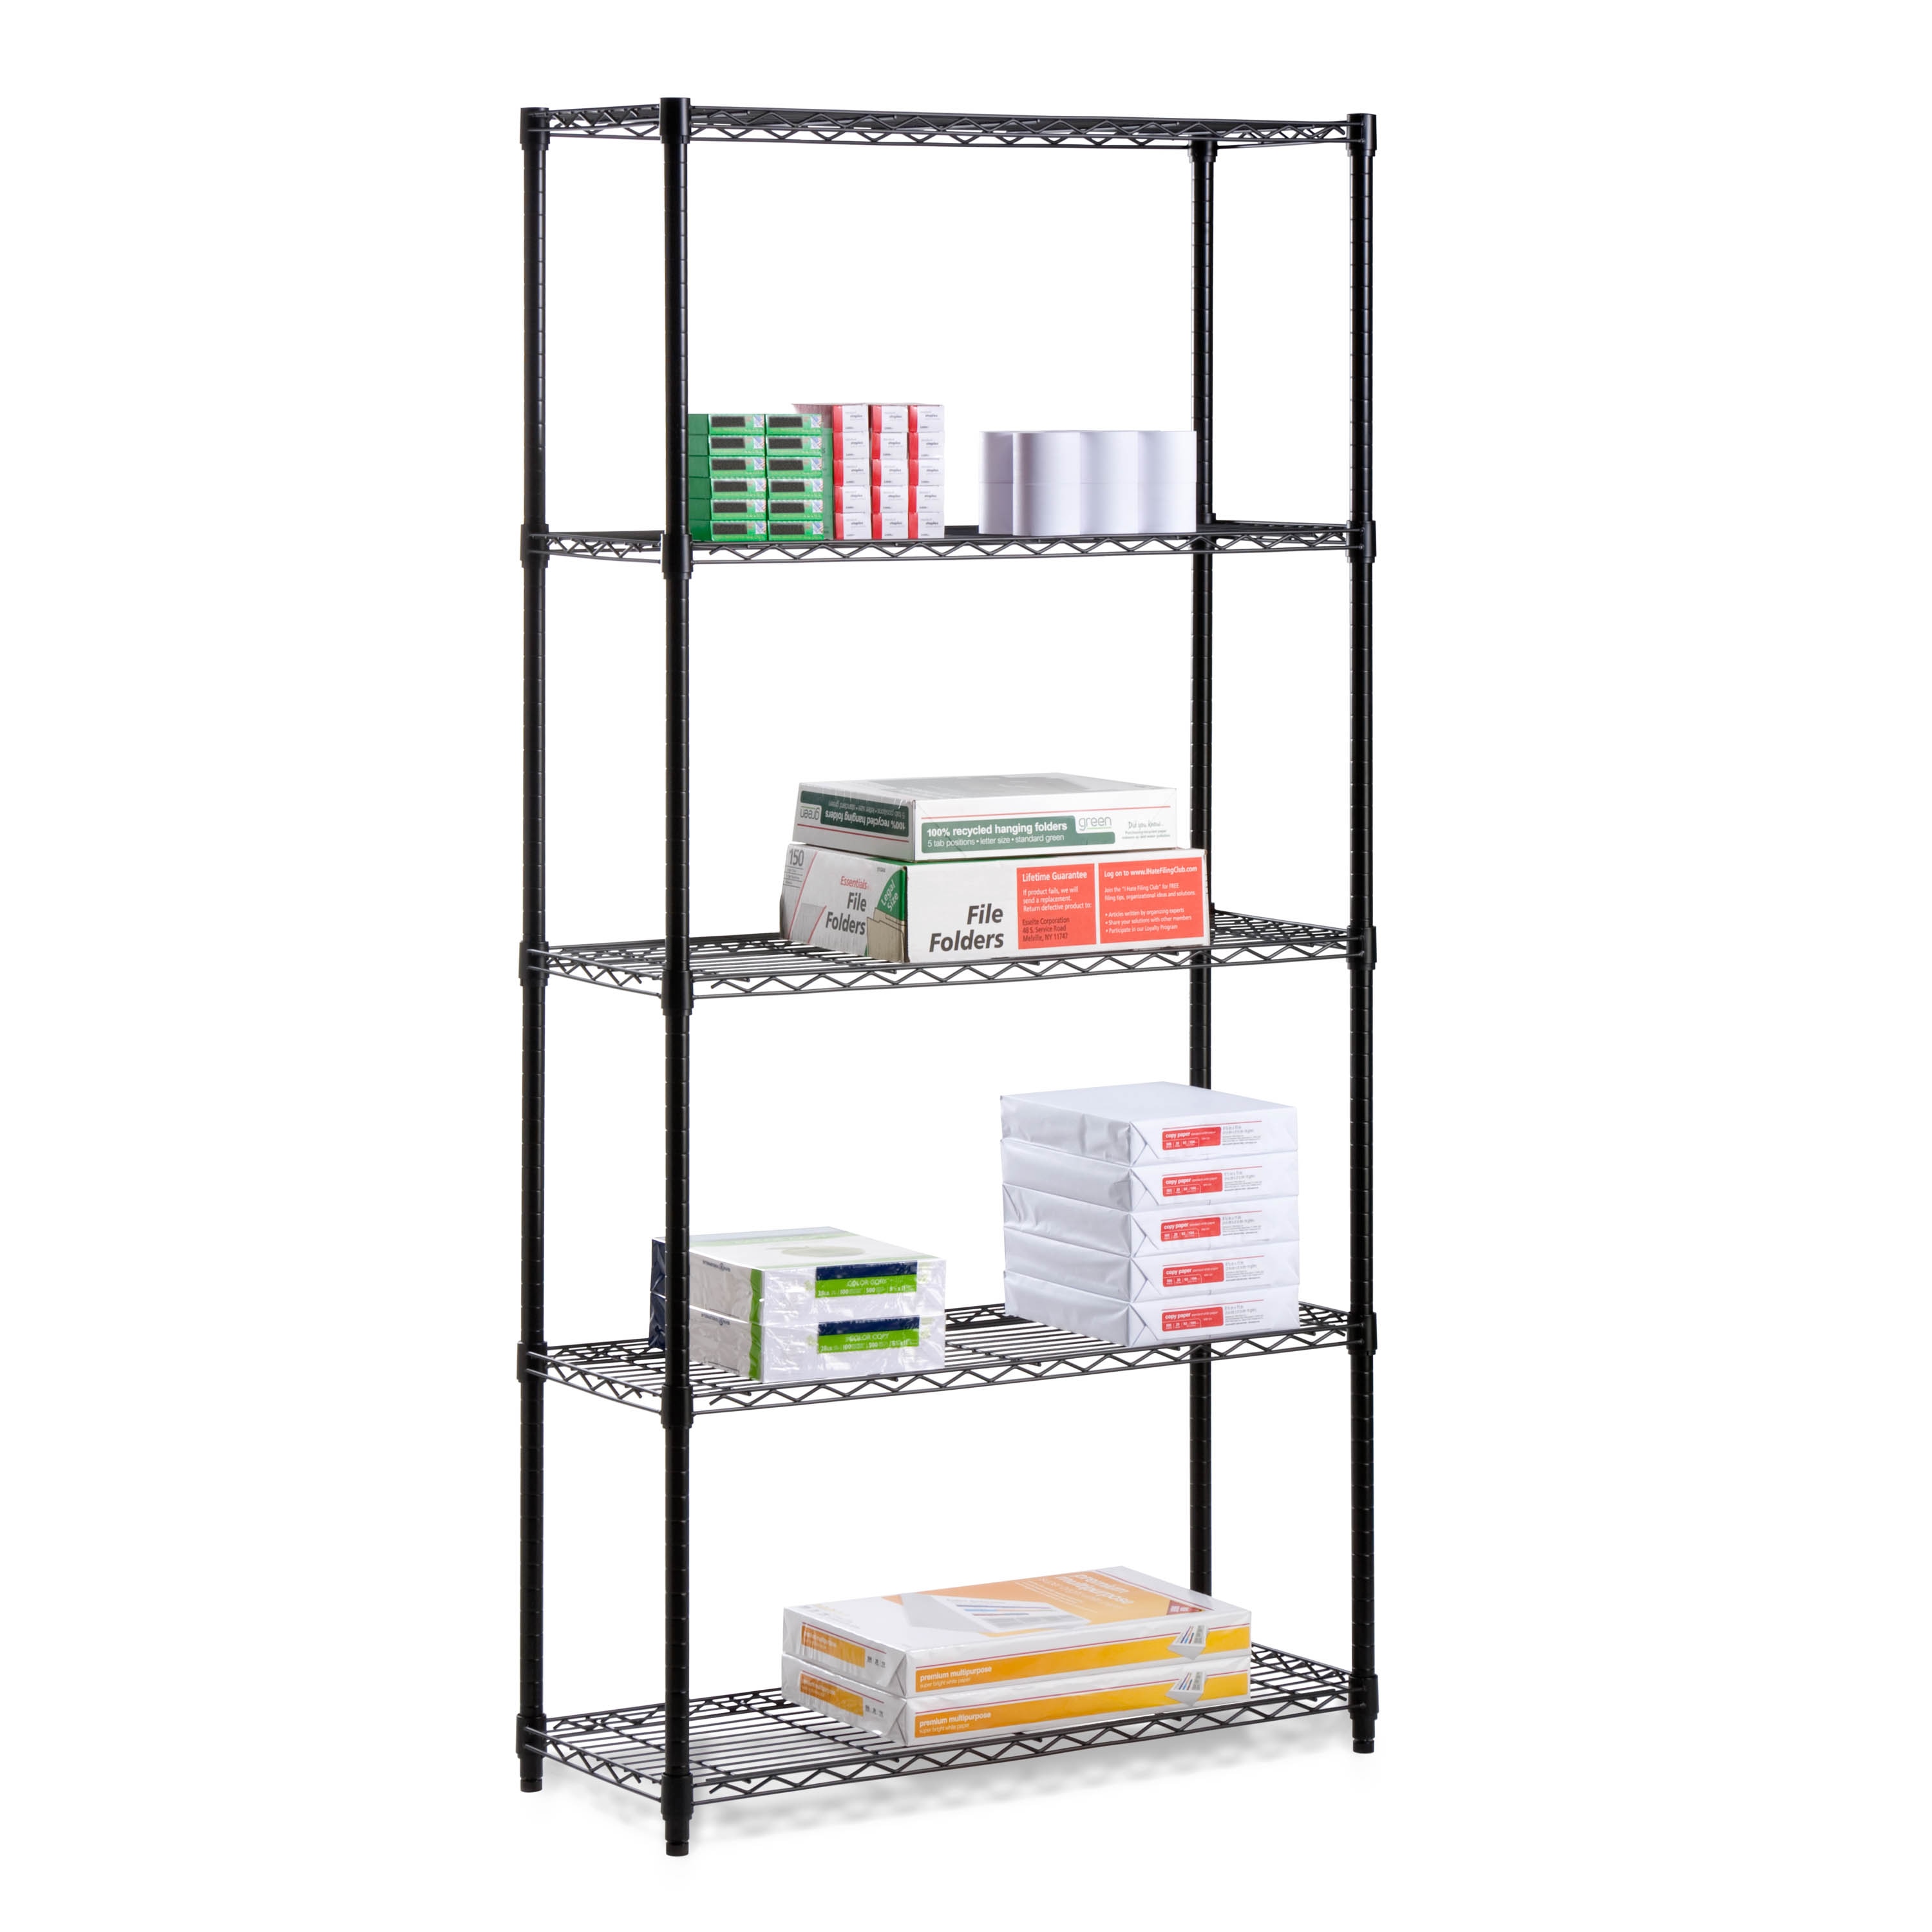 18 Inch Wide Shelves & Shelving at Lowes.com